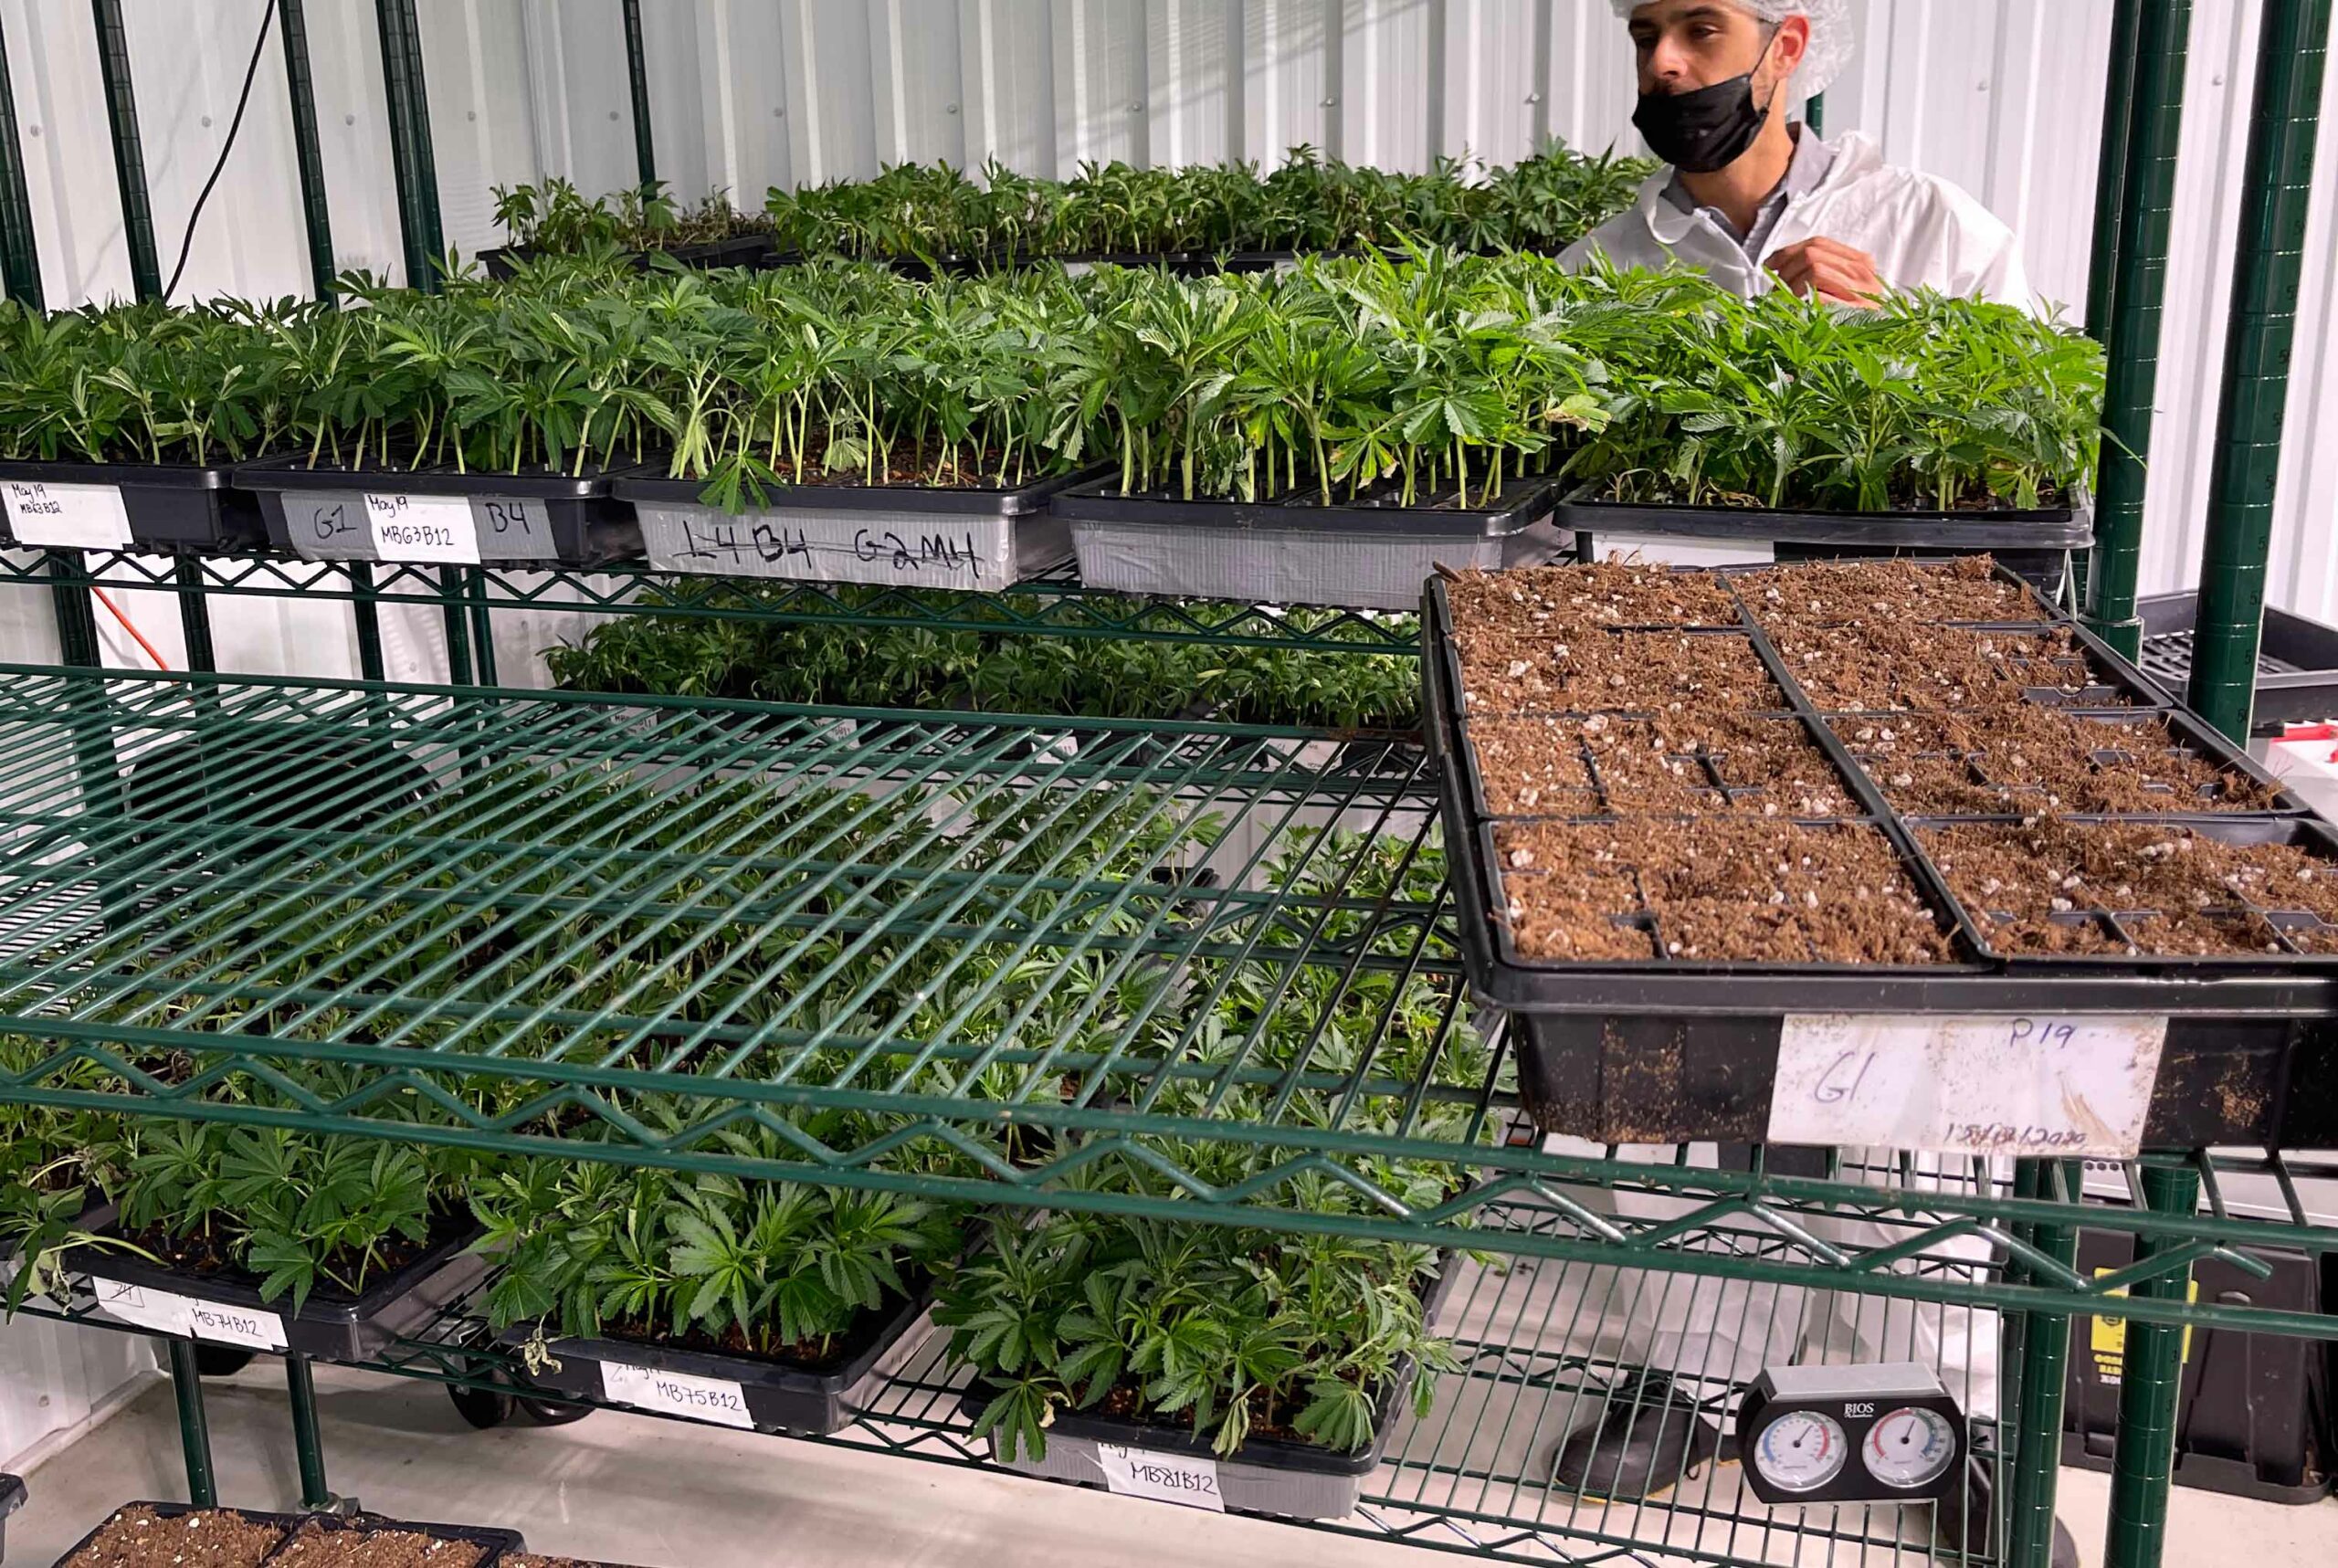 Francis hebert visiting a cannabis facility in quebec. cannabis clones and mothers in a standard cultivation facility